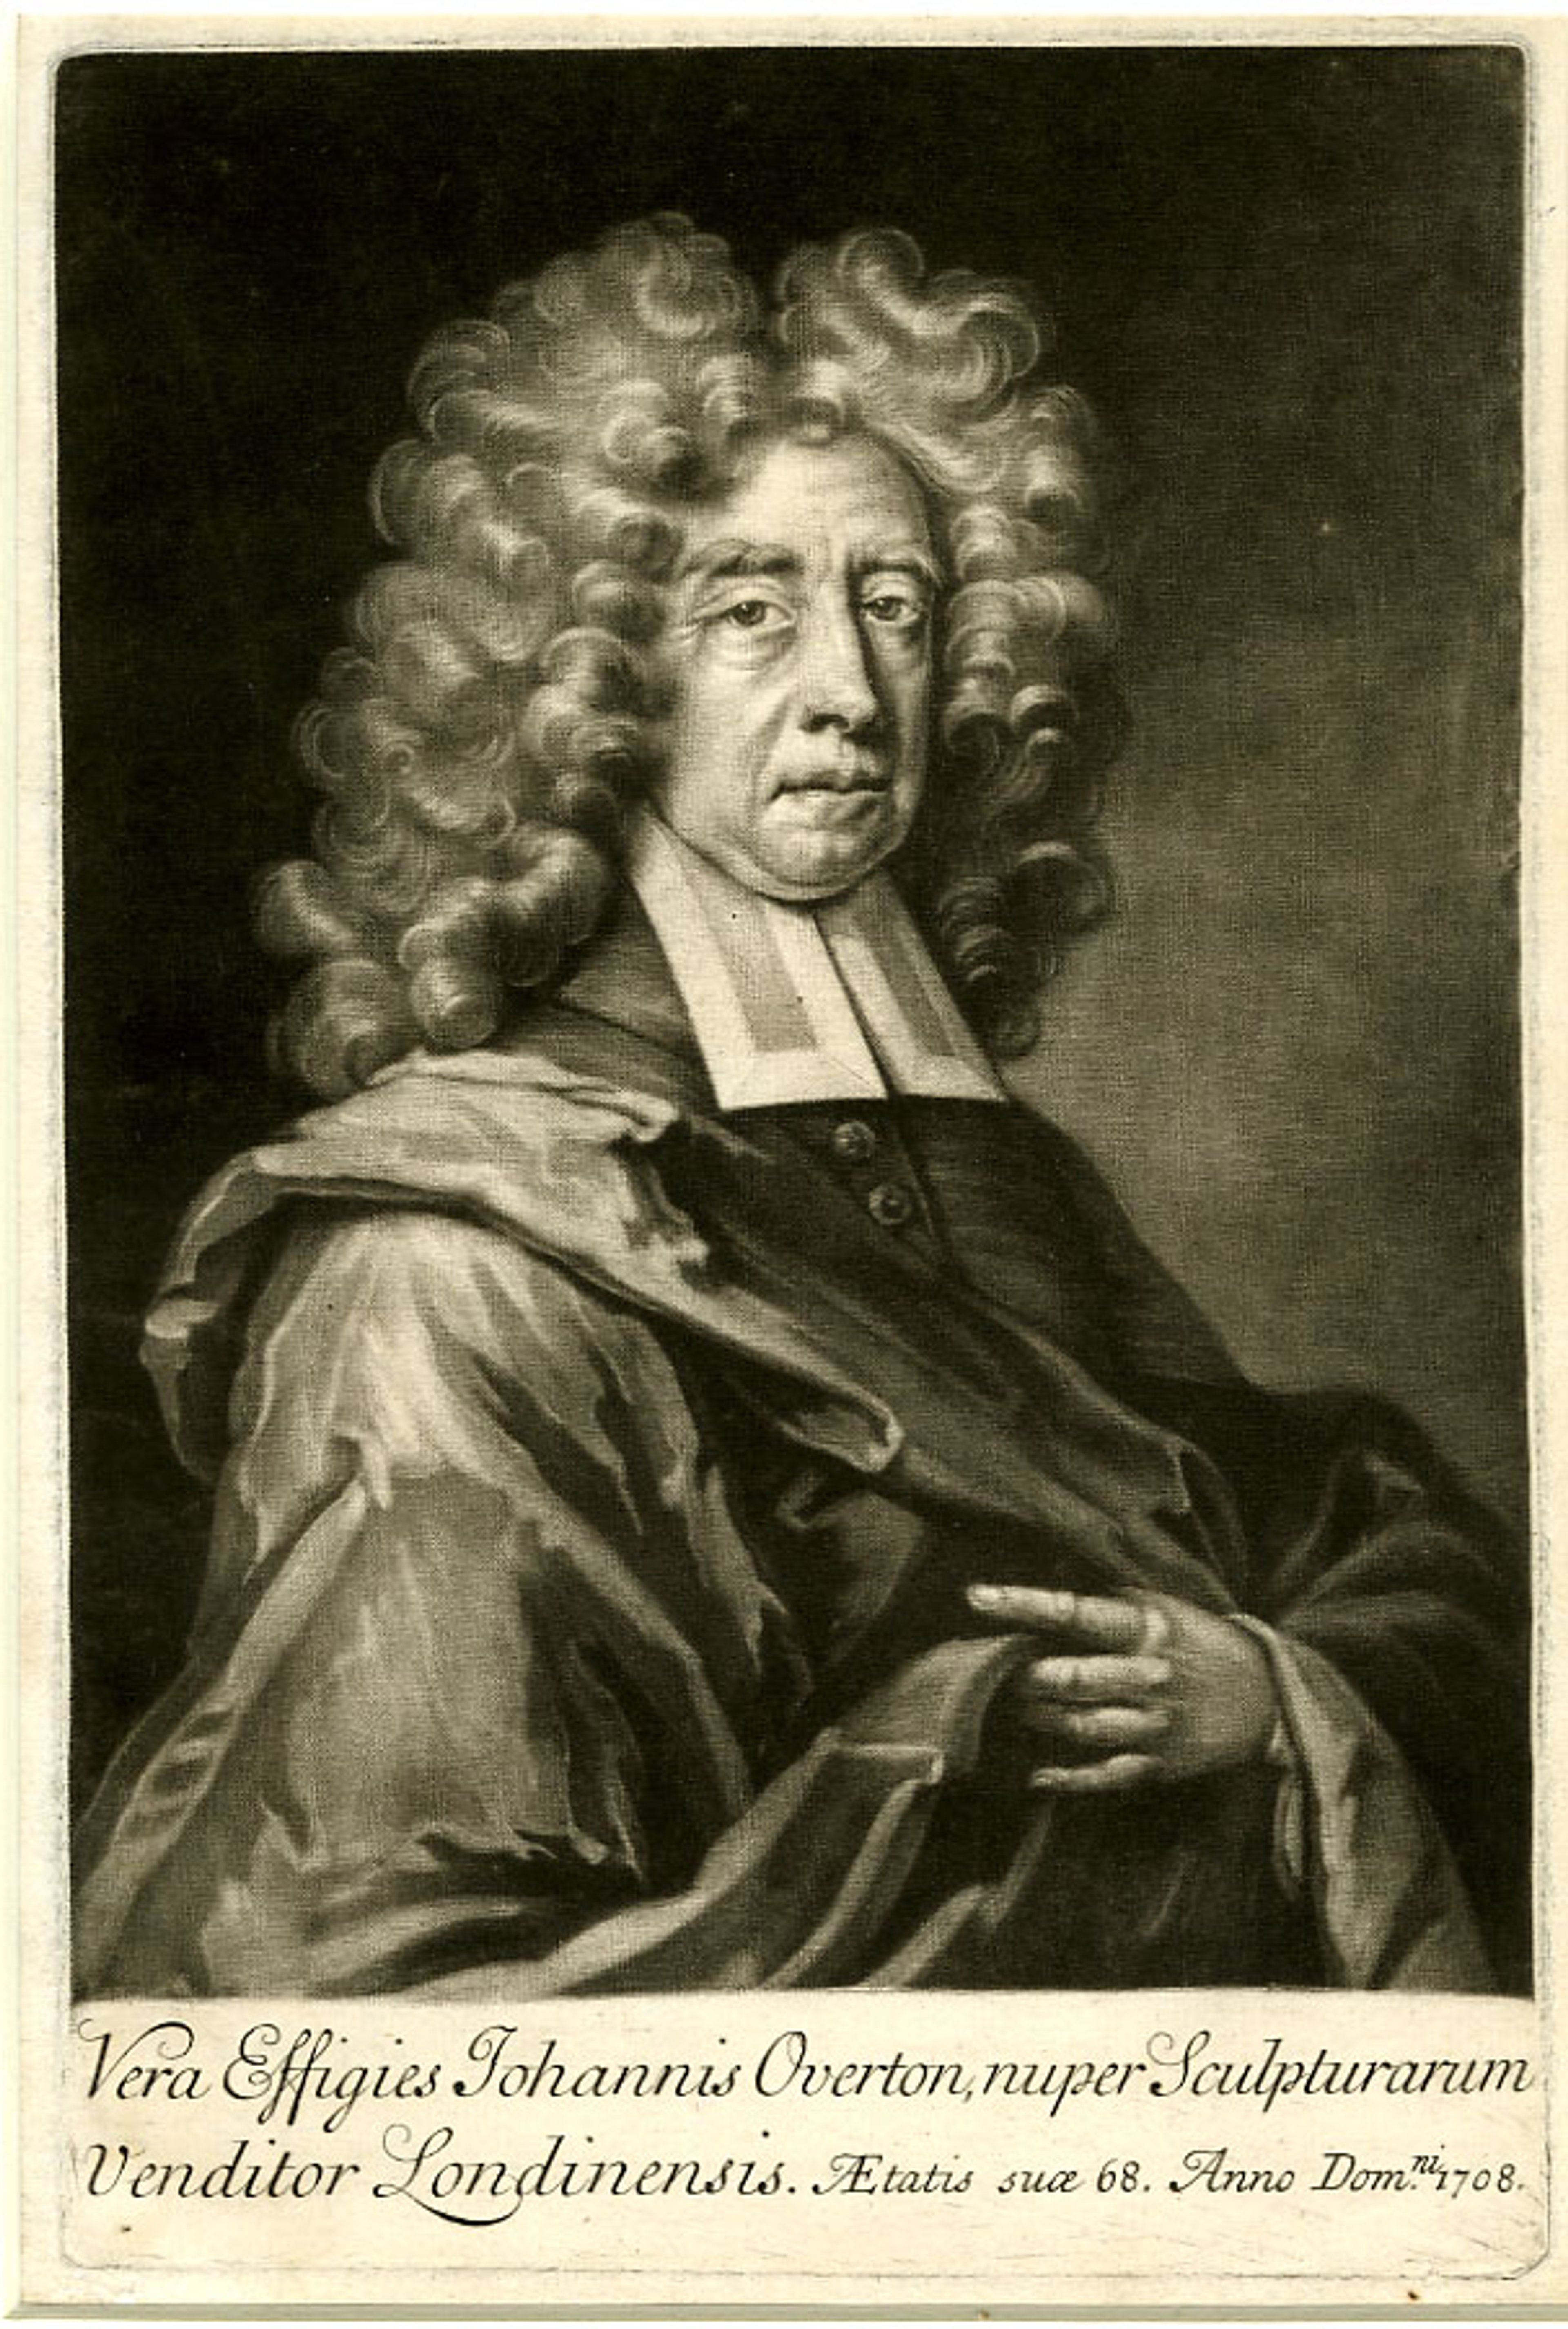 A black and white portrait of John Overton, a man with long curly hair and wearing dark robes.